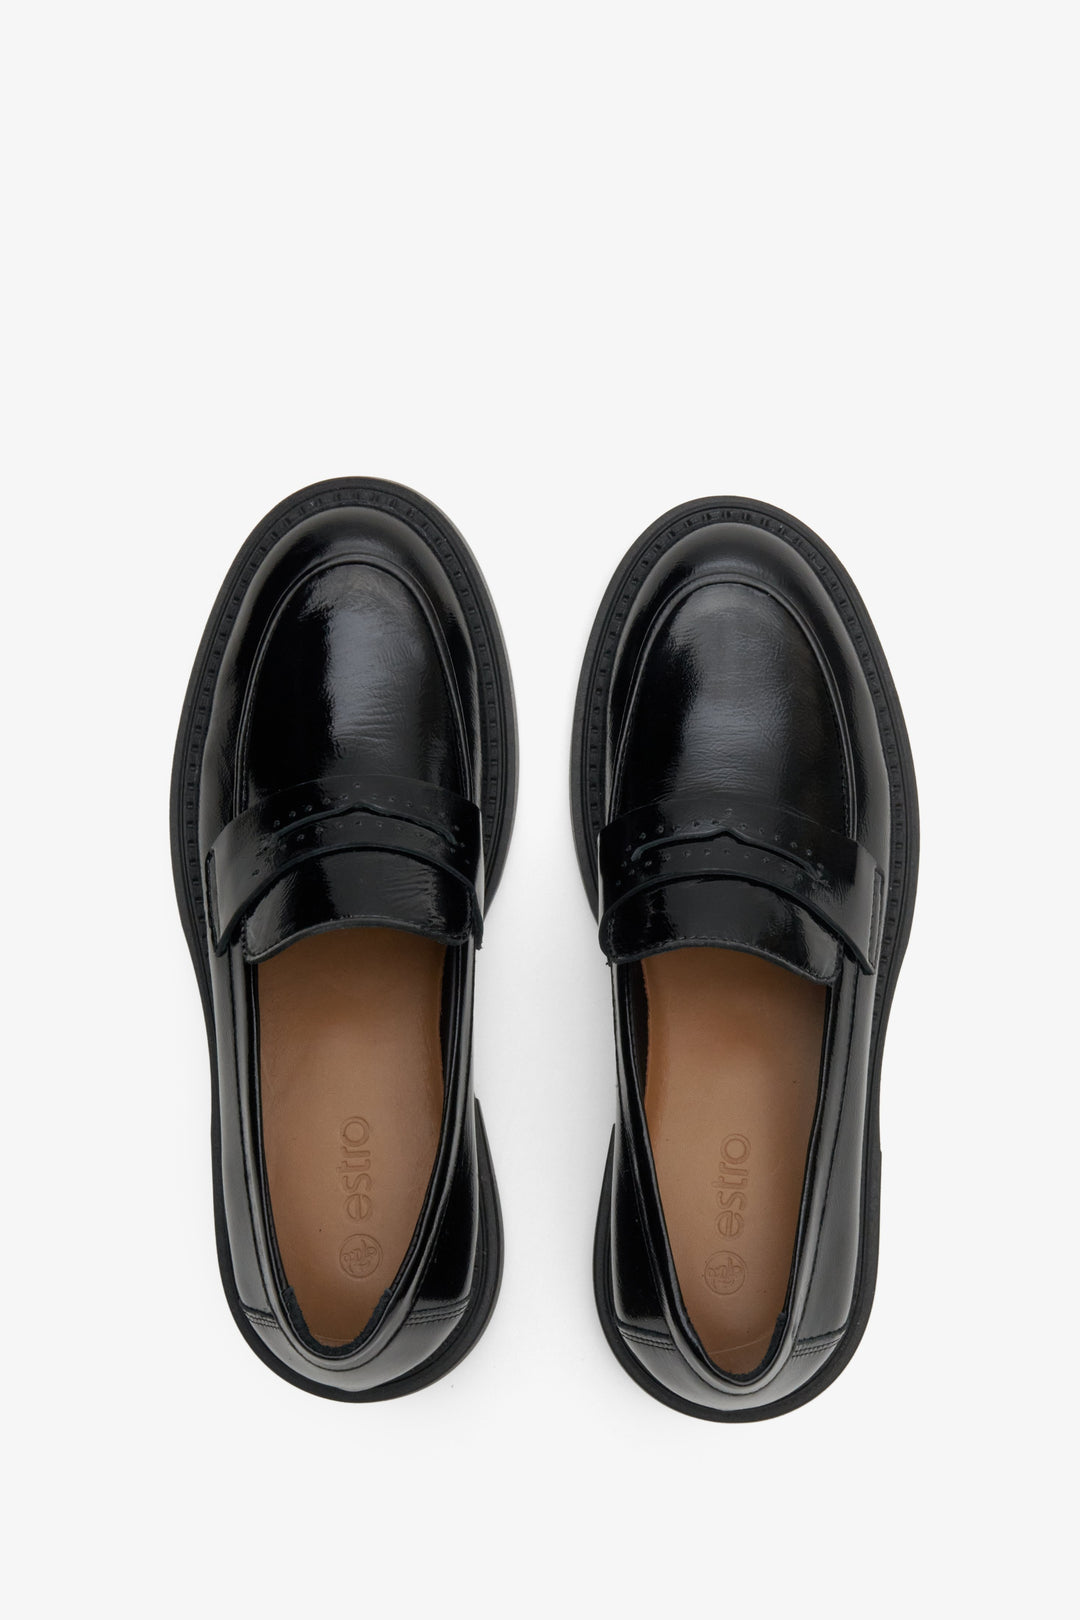 Black leather loafers for women Estro - presentation of the model from above.